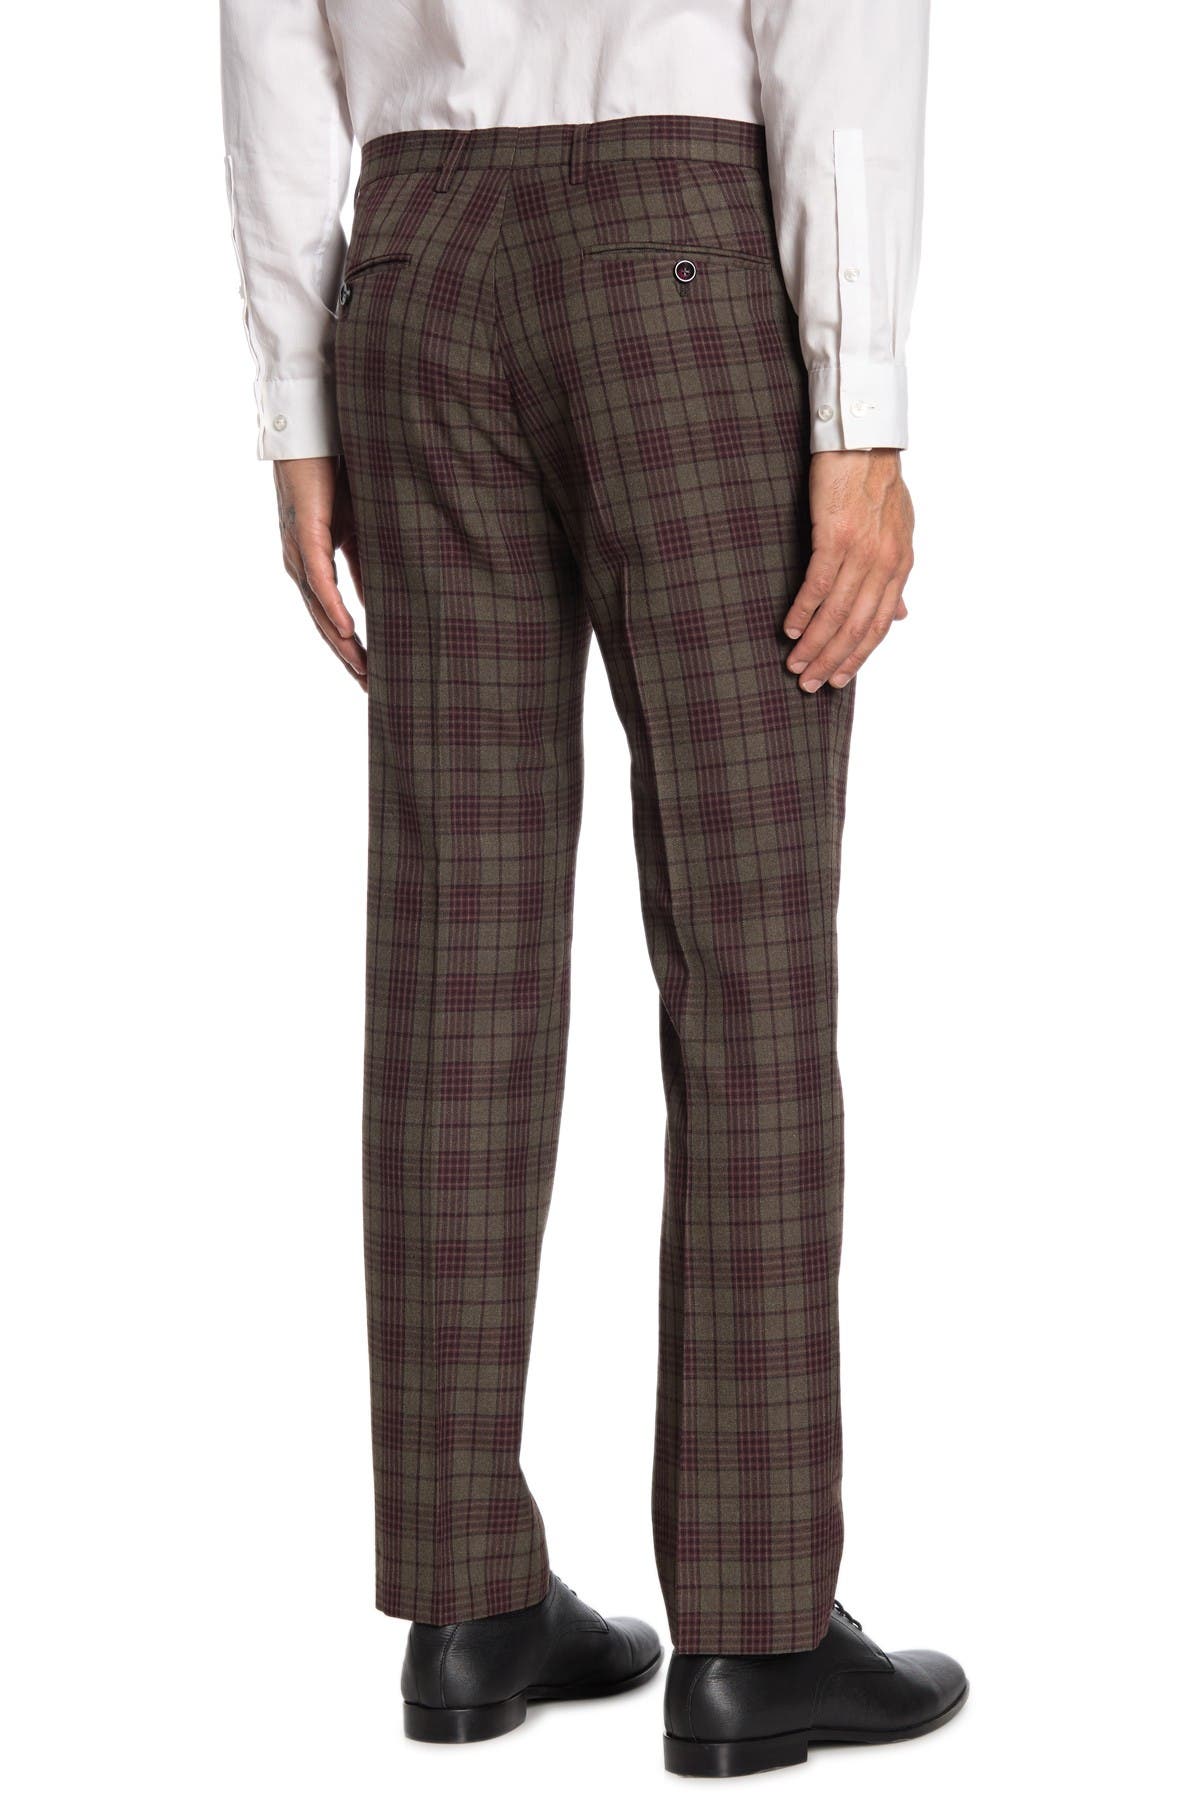 Paisley & Gray | Downing Olive/Red Plaid Slim Fit Suit Pants